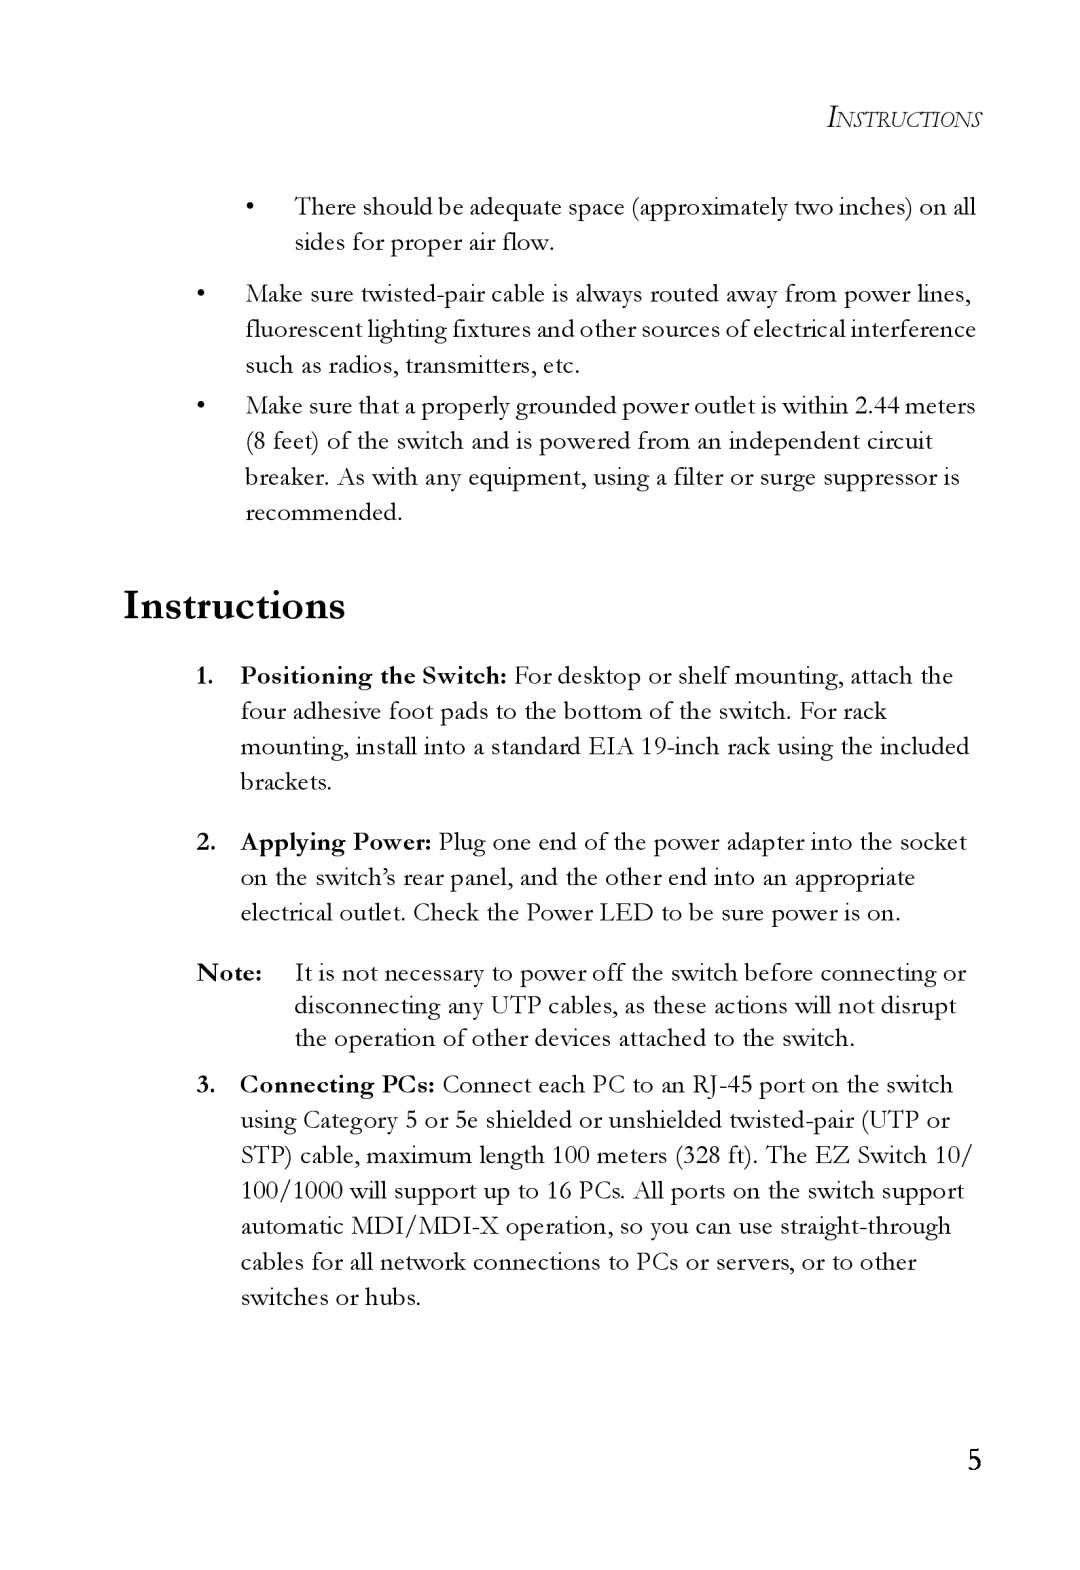 SMC Networks SMCGS24 manual Instructions 